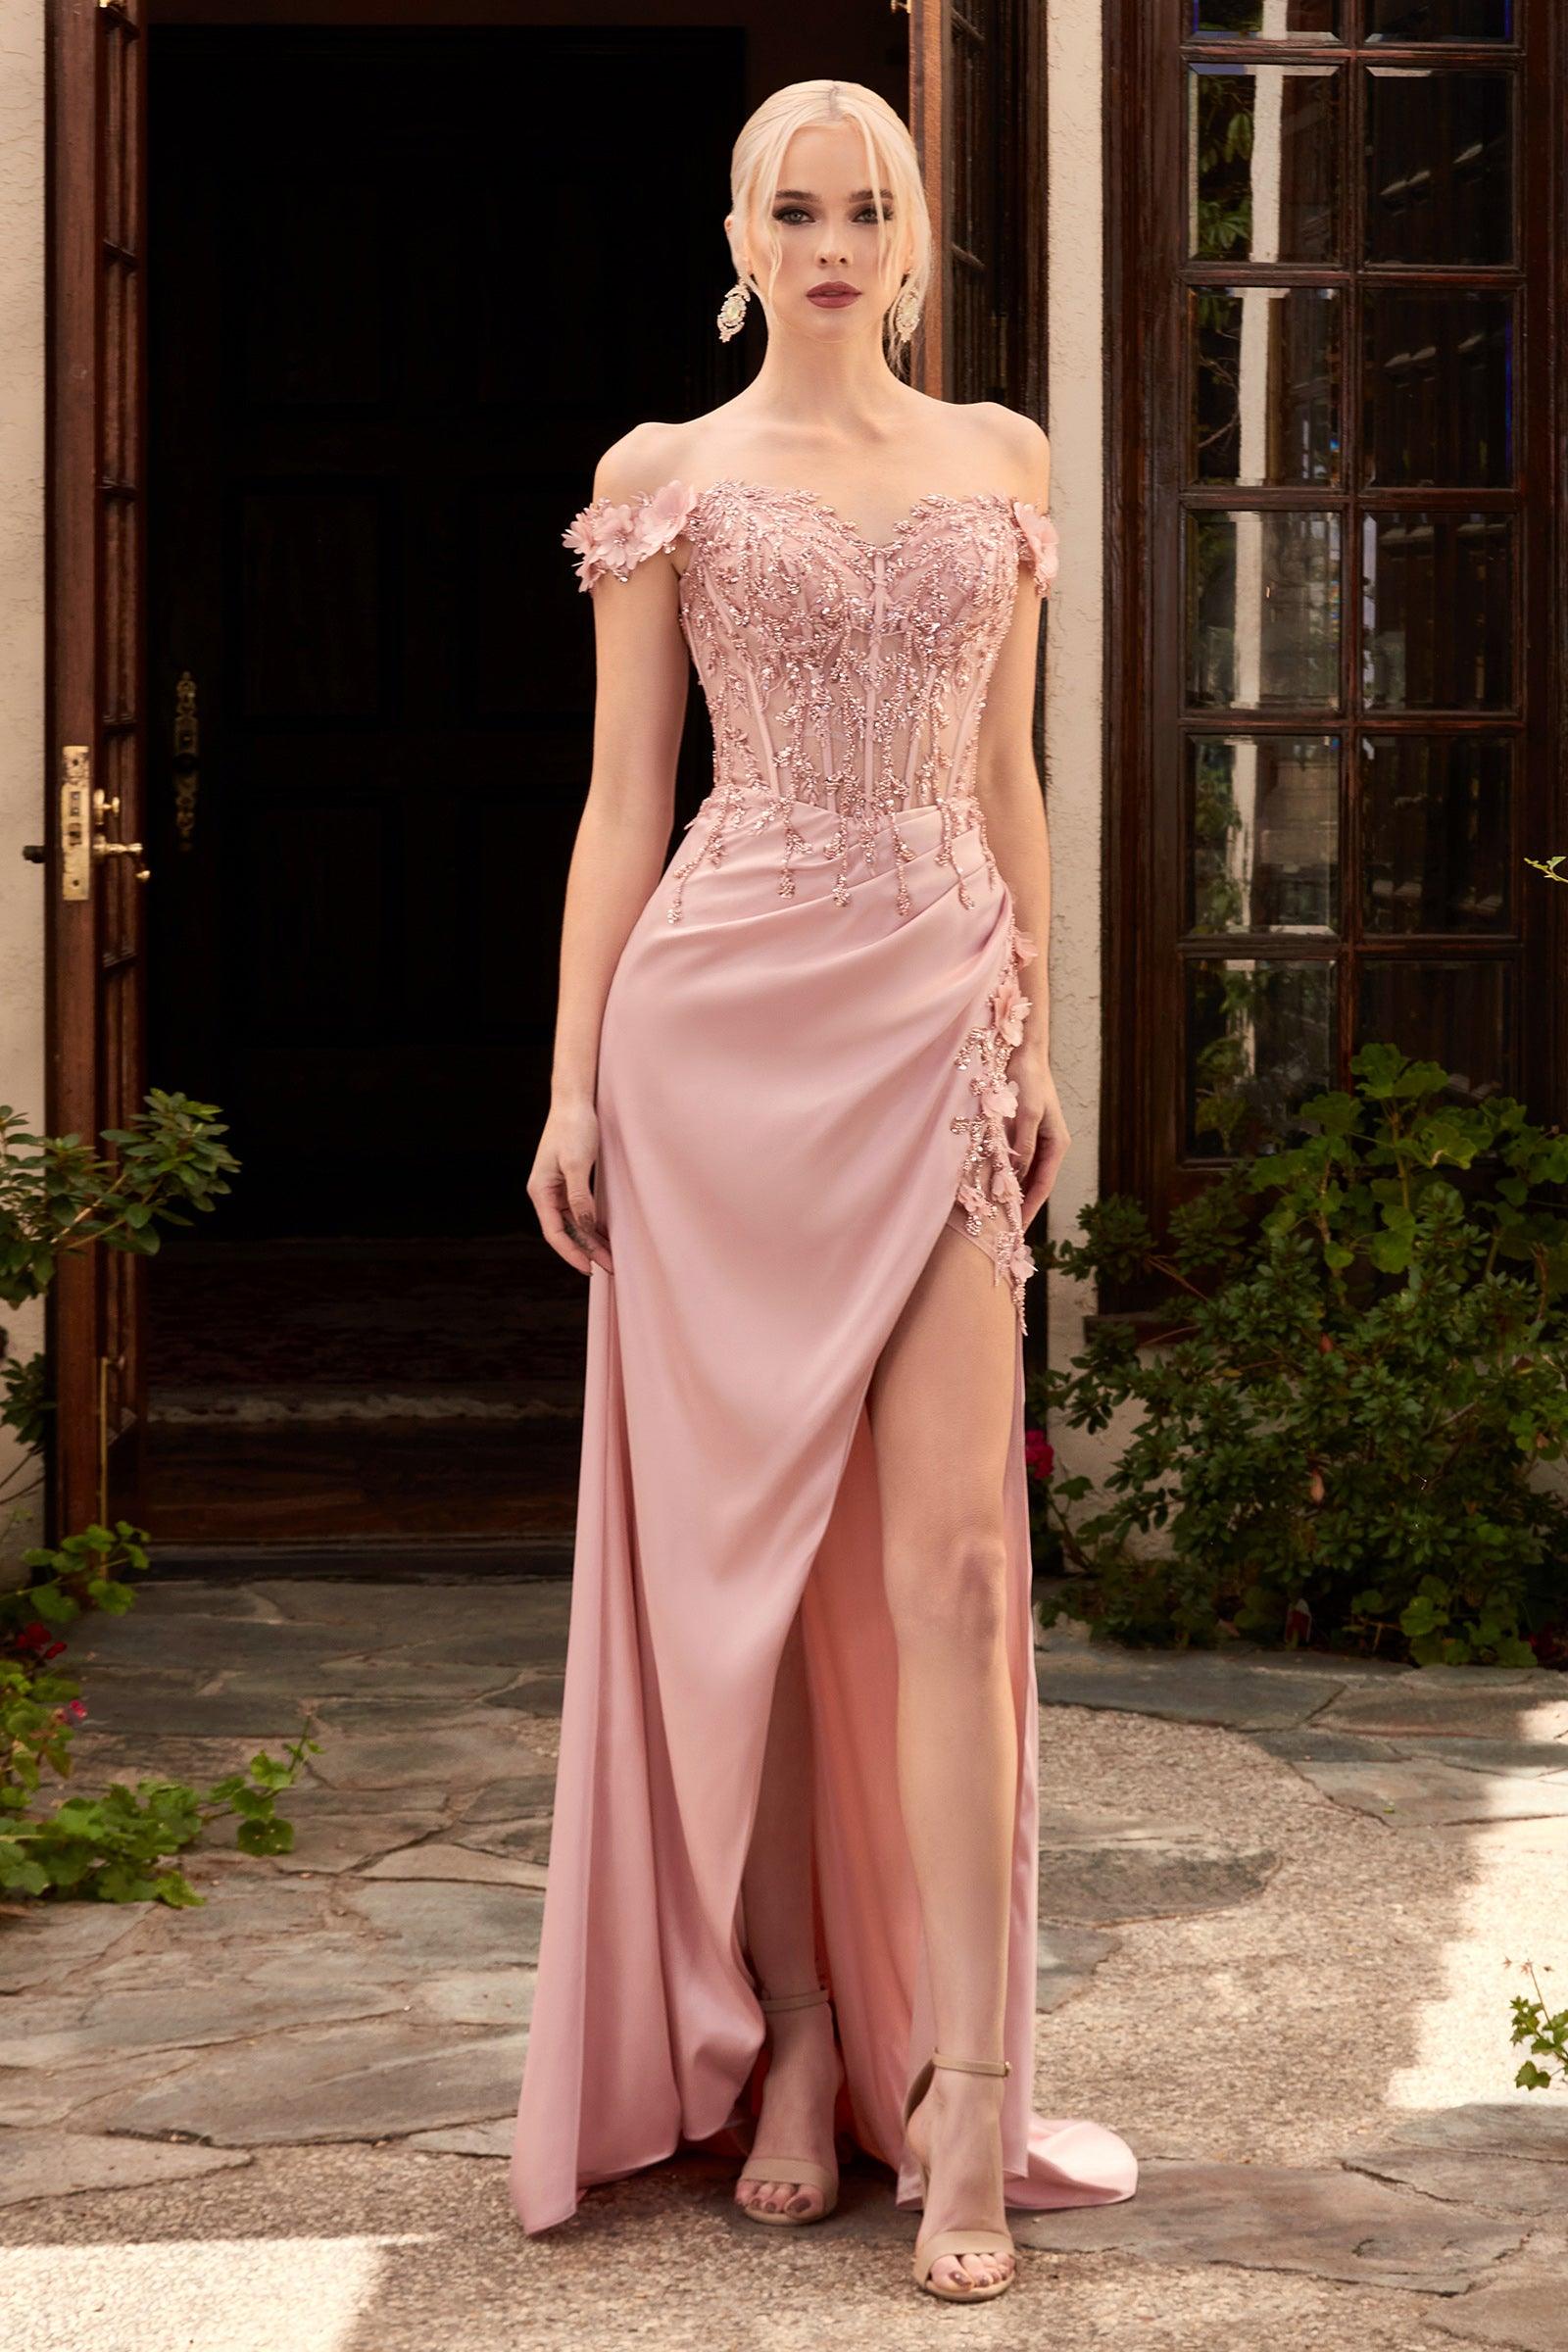 Dusty Lavender Cinderella Divine CD0186 A Line Off Shoulder Sexy Long Prom  Dress for $220.0, – The Dress Outlet